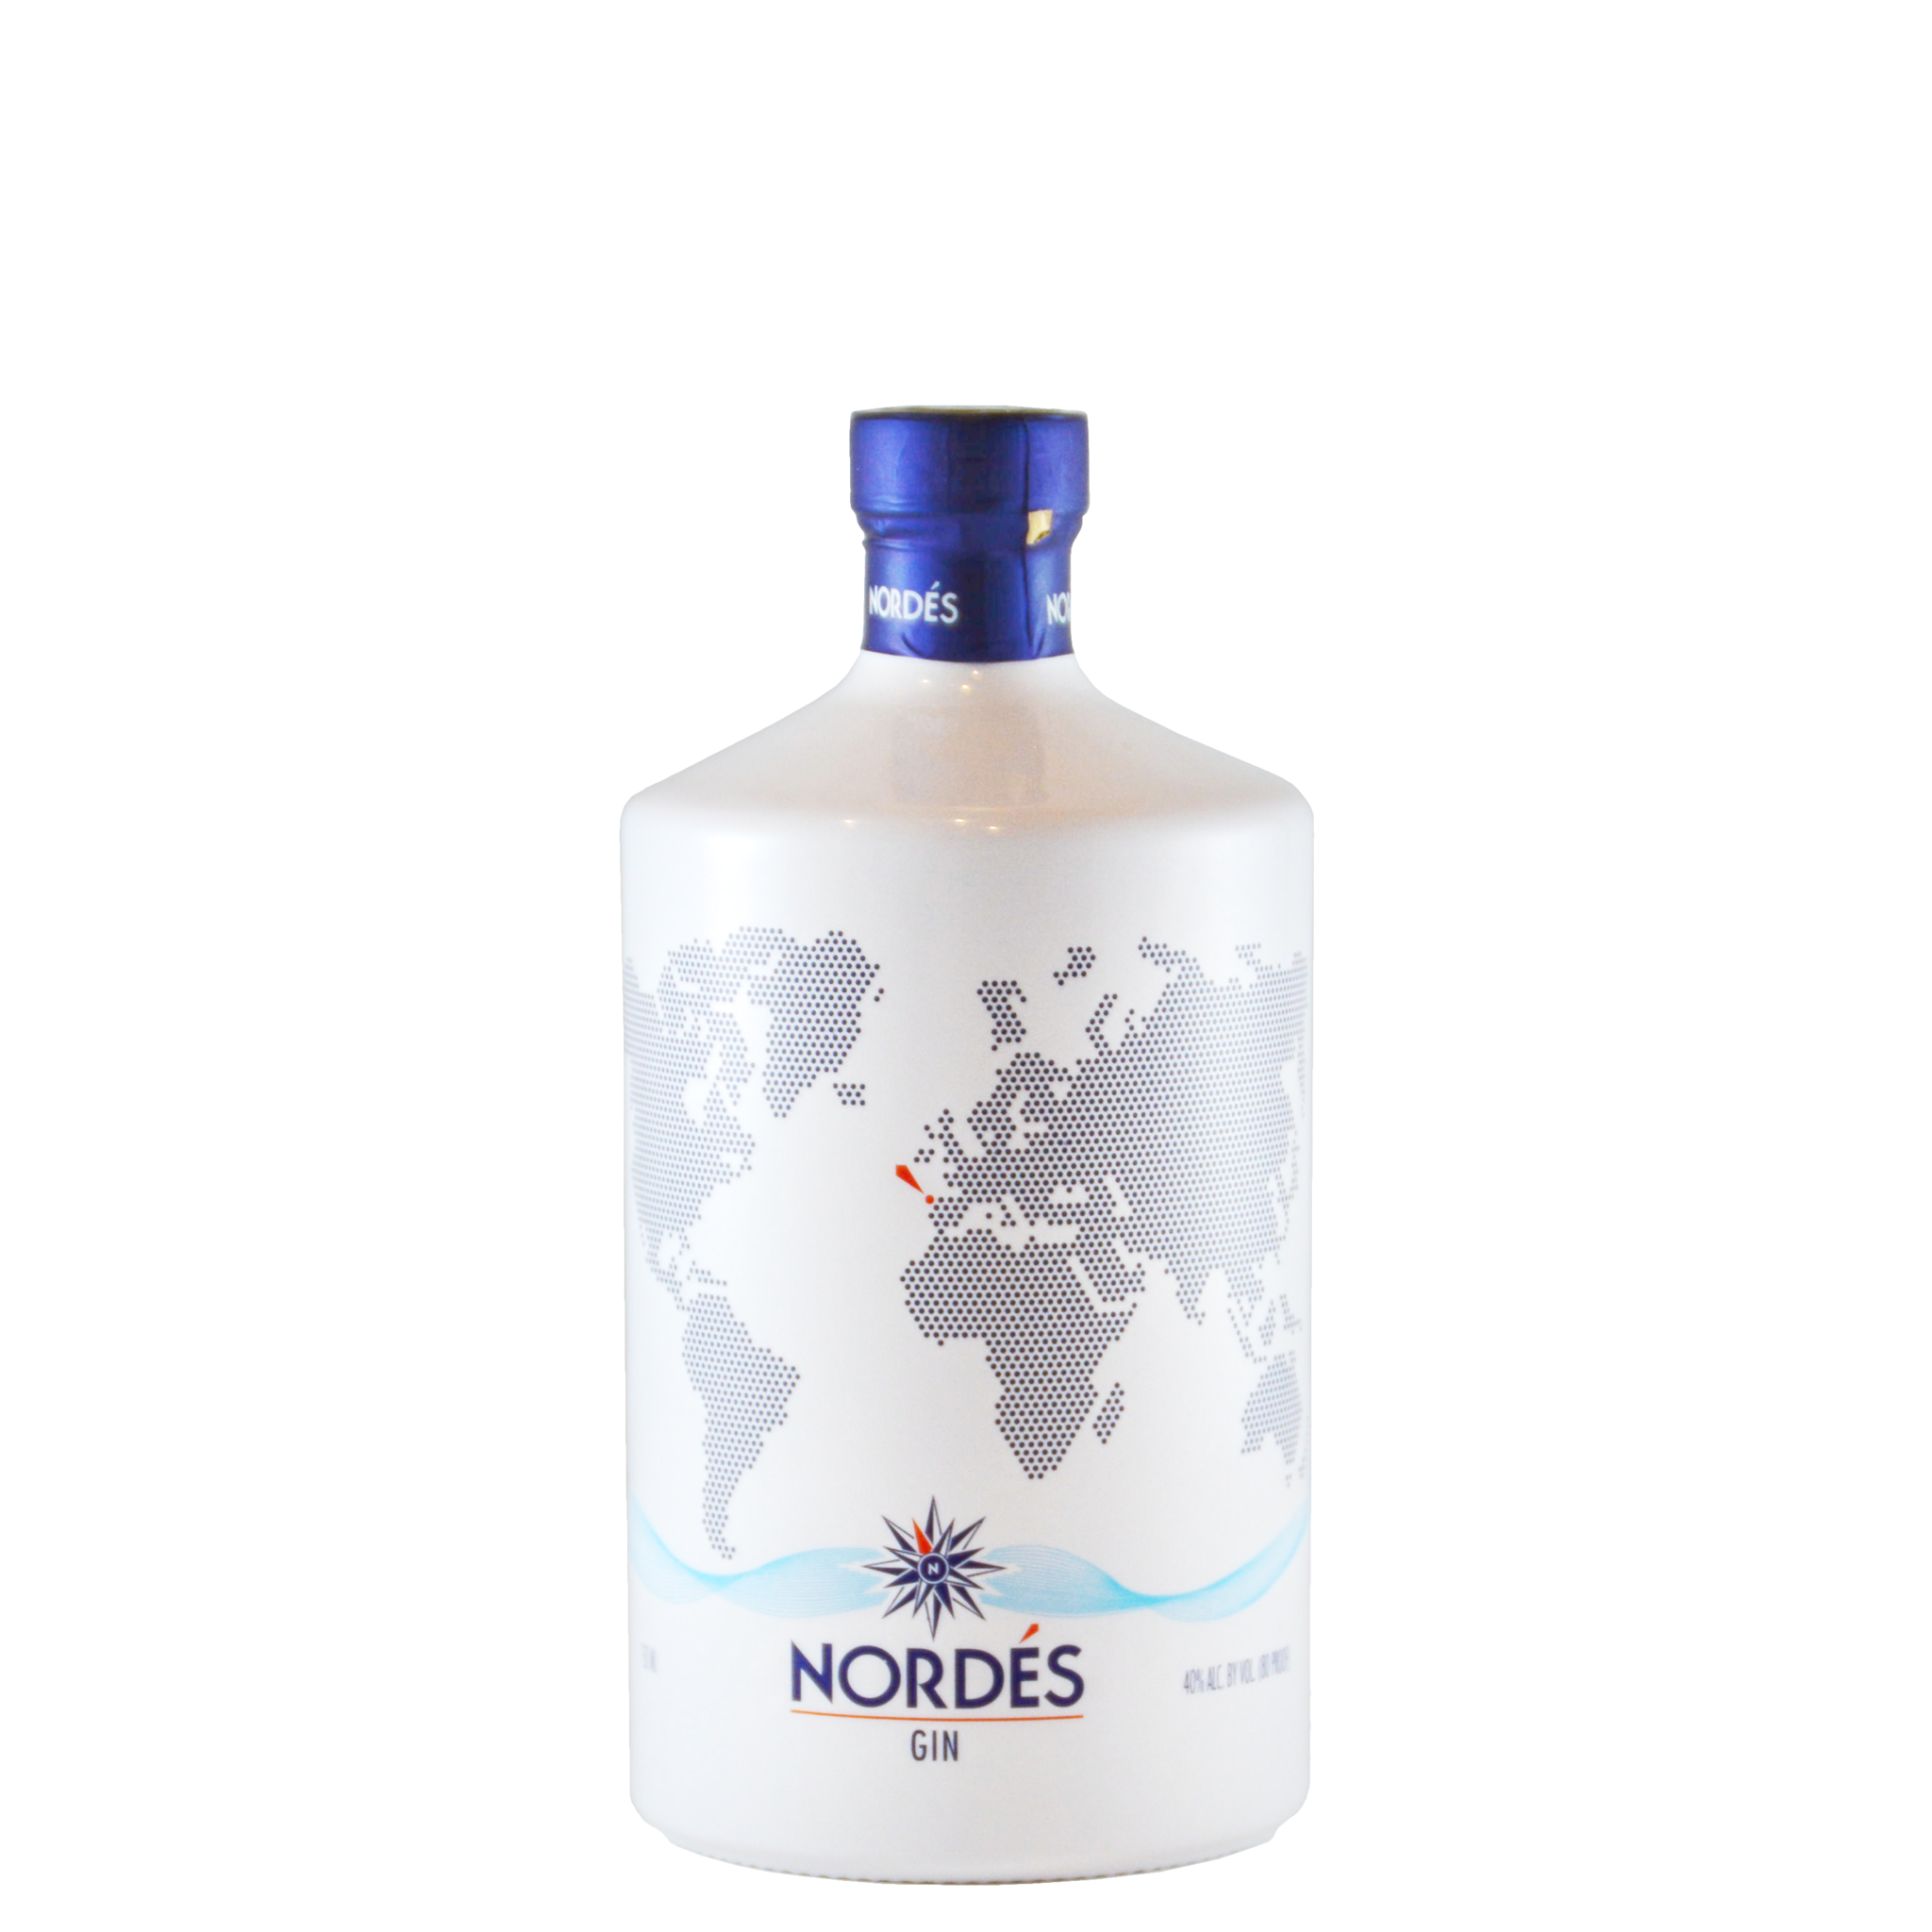 Nordés Gin Review - From the Gin Shelf